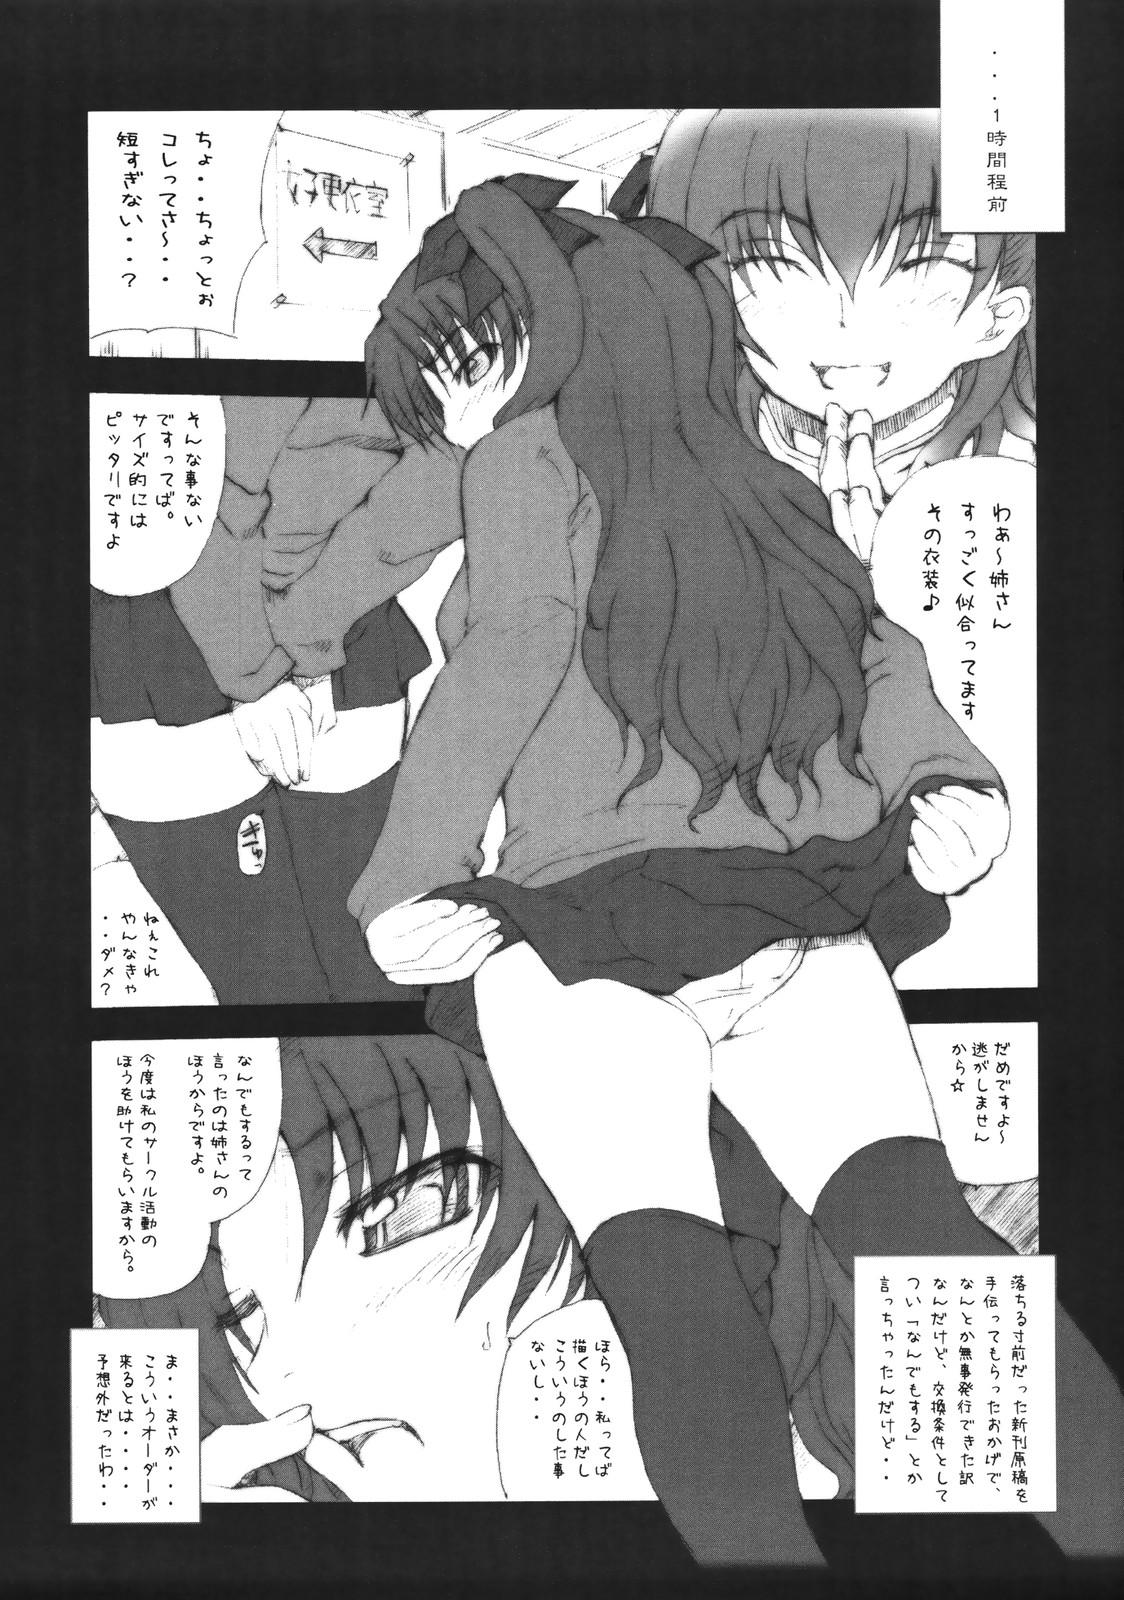 Hymen SHOT MANIA 2nd STAGE - Fate stay night Tinder - Page 5